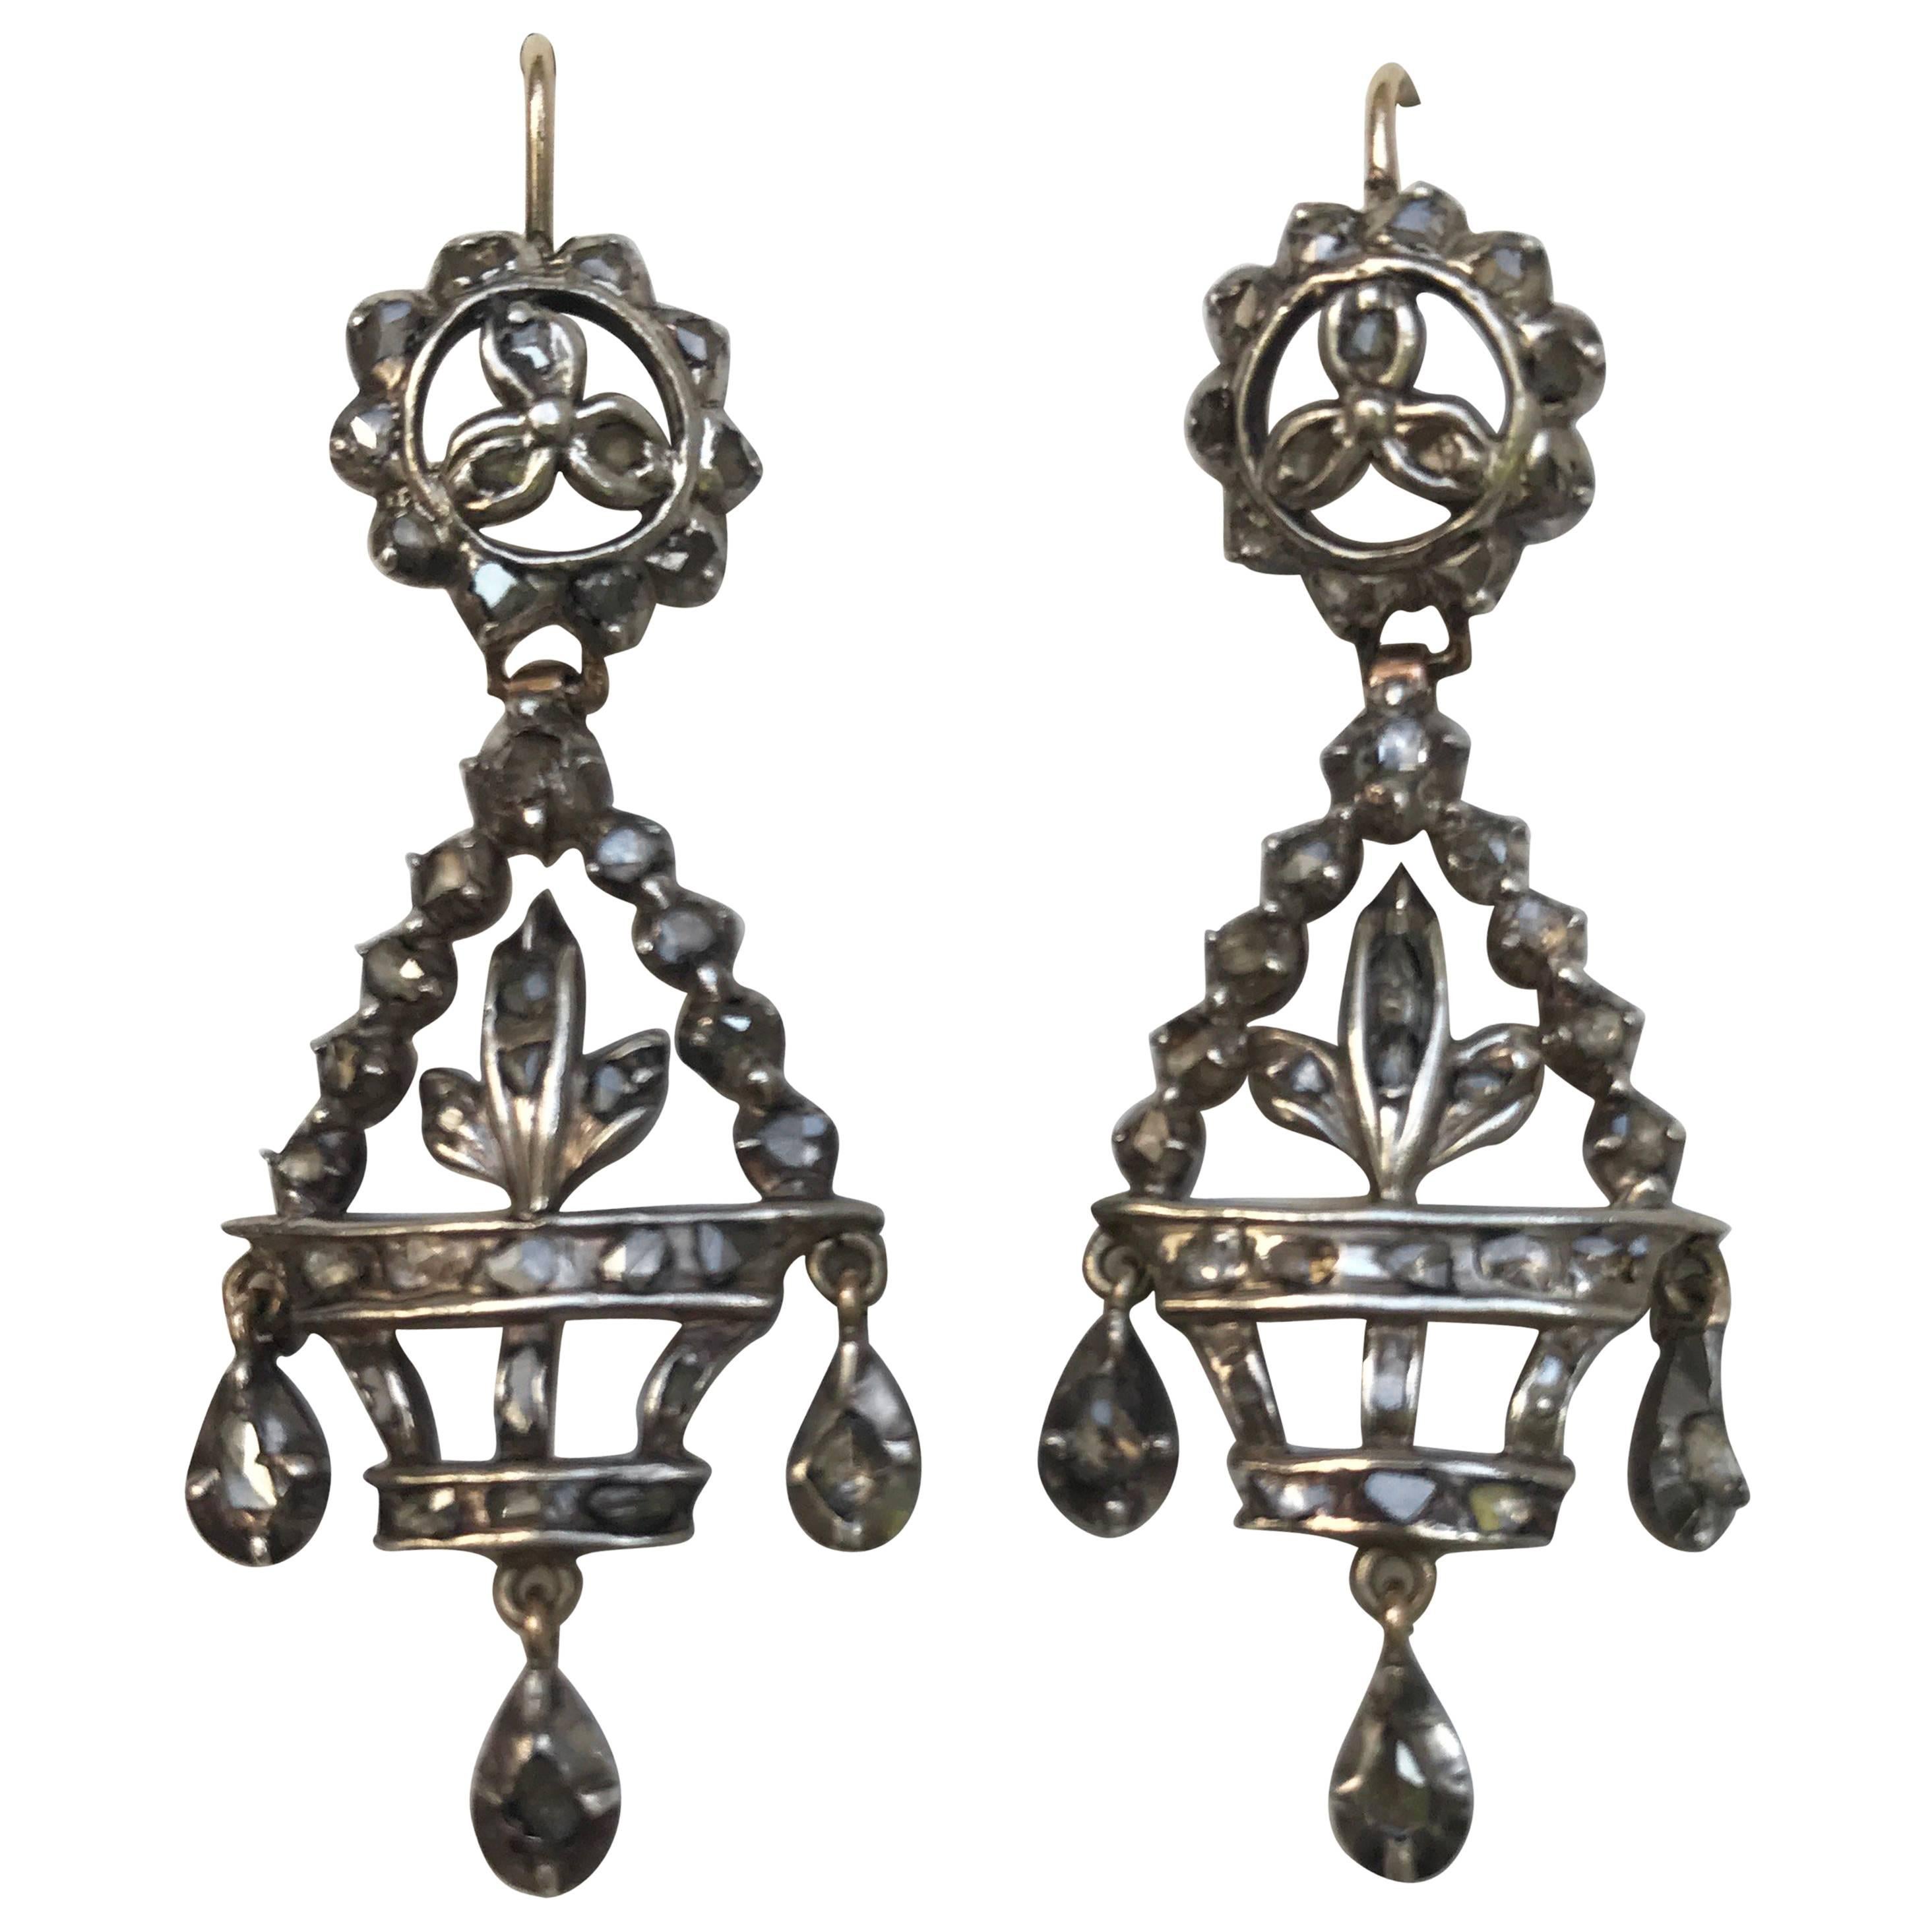 A pair of antique Giardinetti urn shaped earrings, set in a pinched silver setting, typical of the period, with gold hooks to the back and then backed in gold too. Very elegant earrings the front is silver set and the back is set in gold with 9k